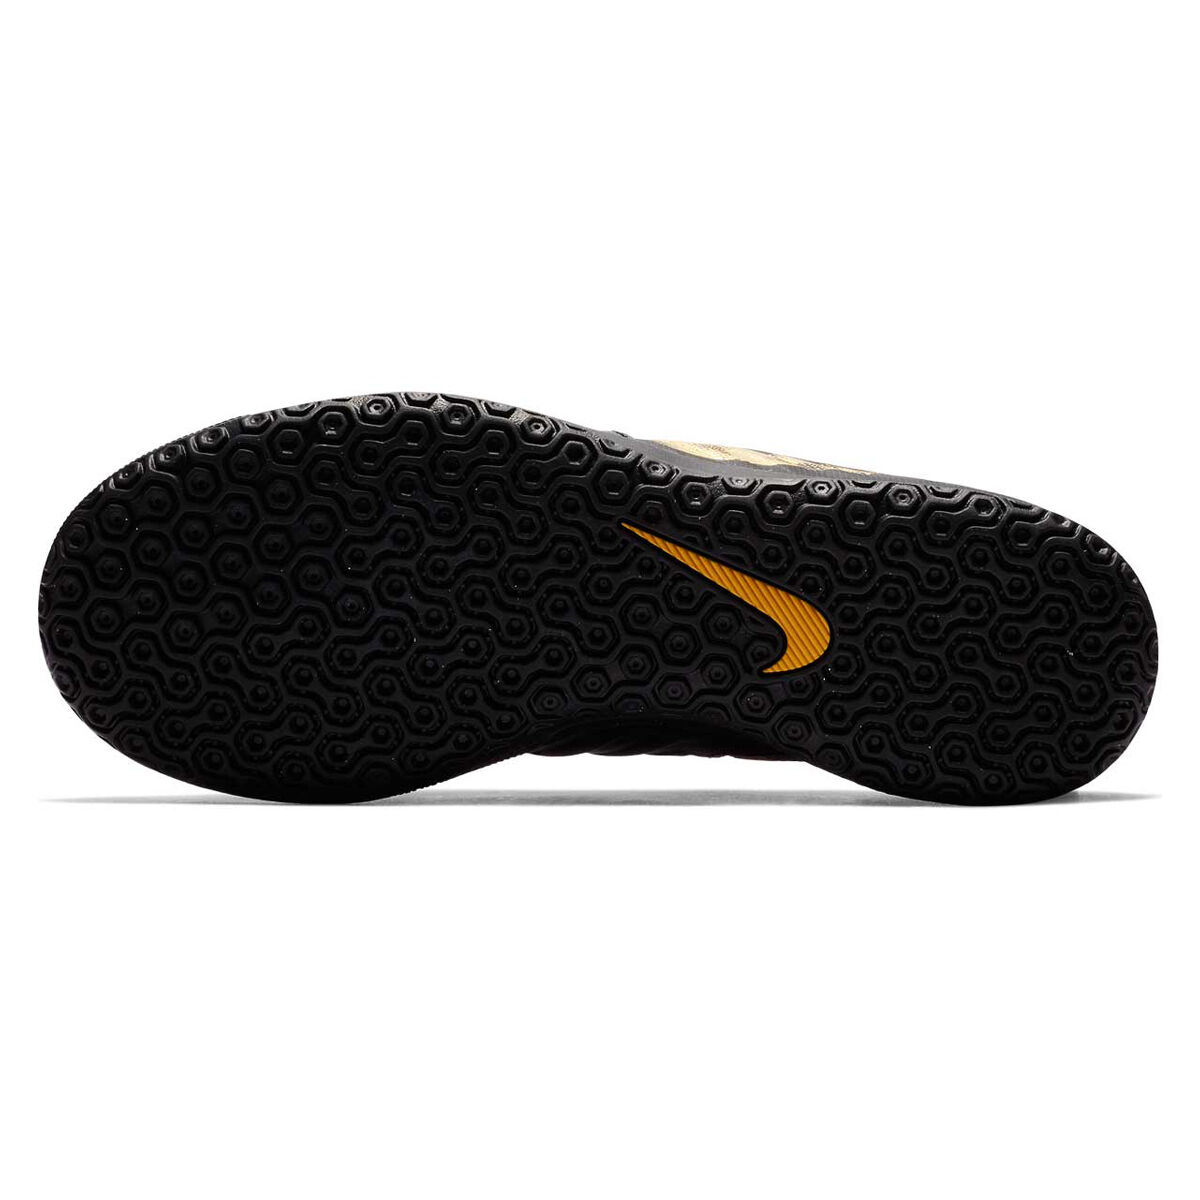 black and gold indoor soccer shoes